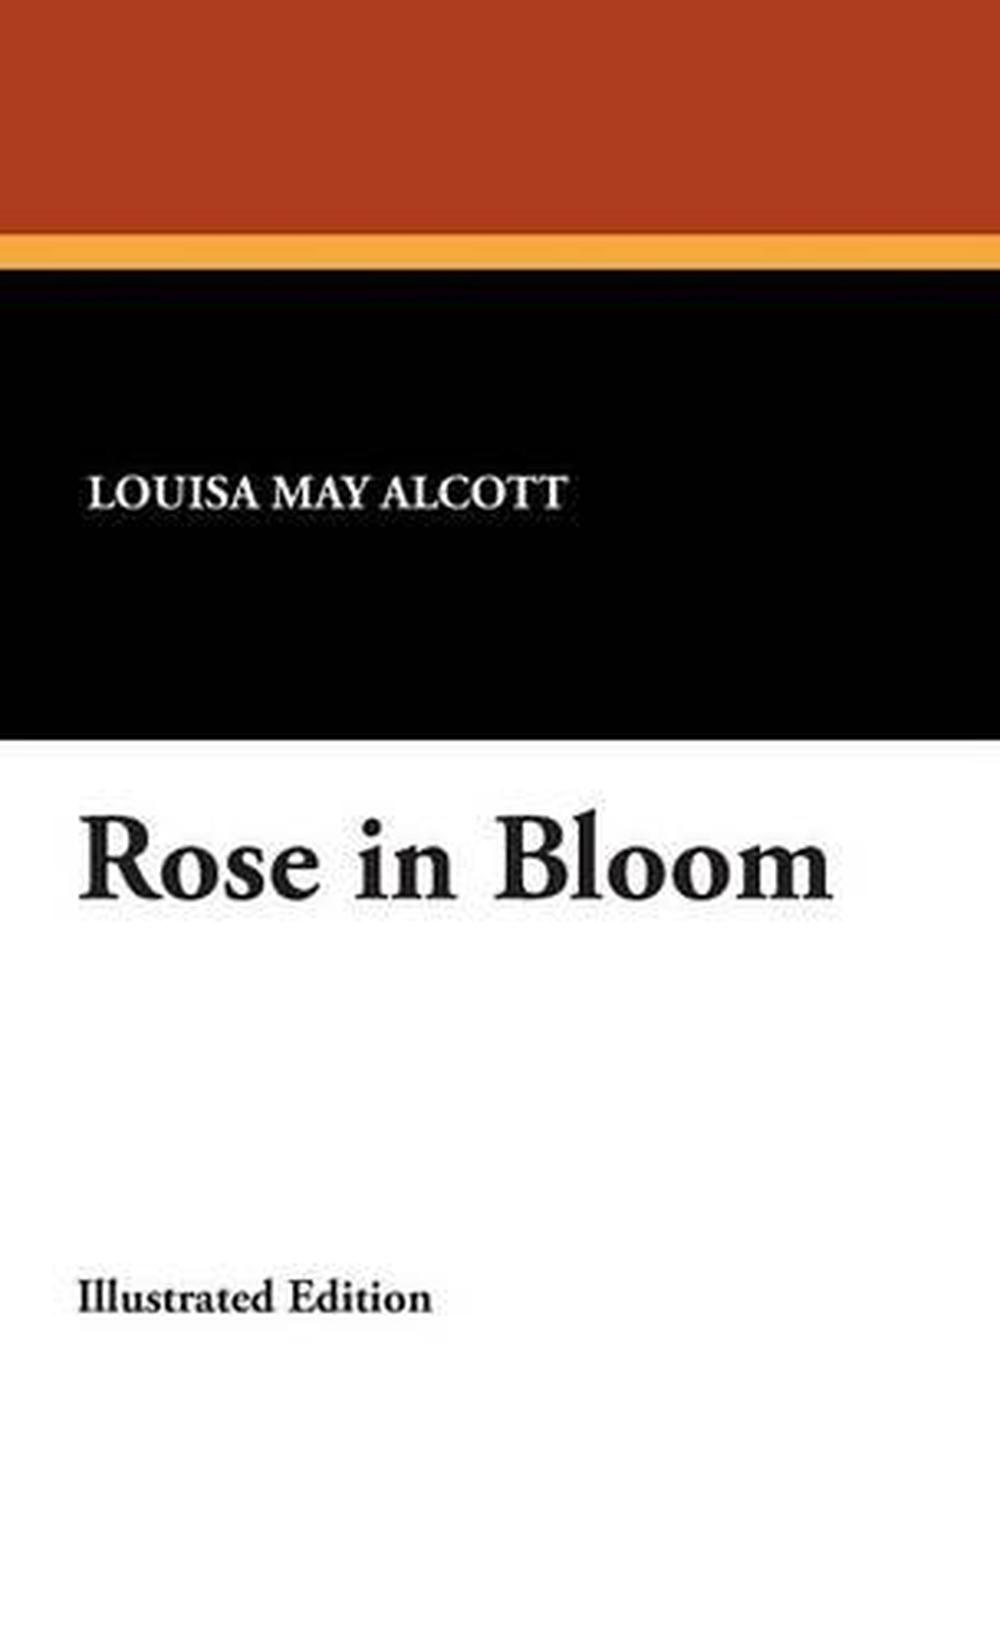 Rose in Bloom by Louisa May Alcott (English) Hardcover Book Free Shipping! 9781434494542 | eBay